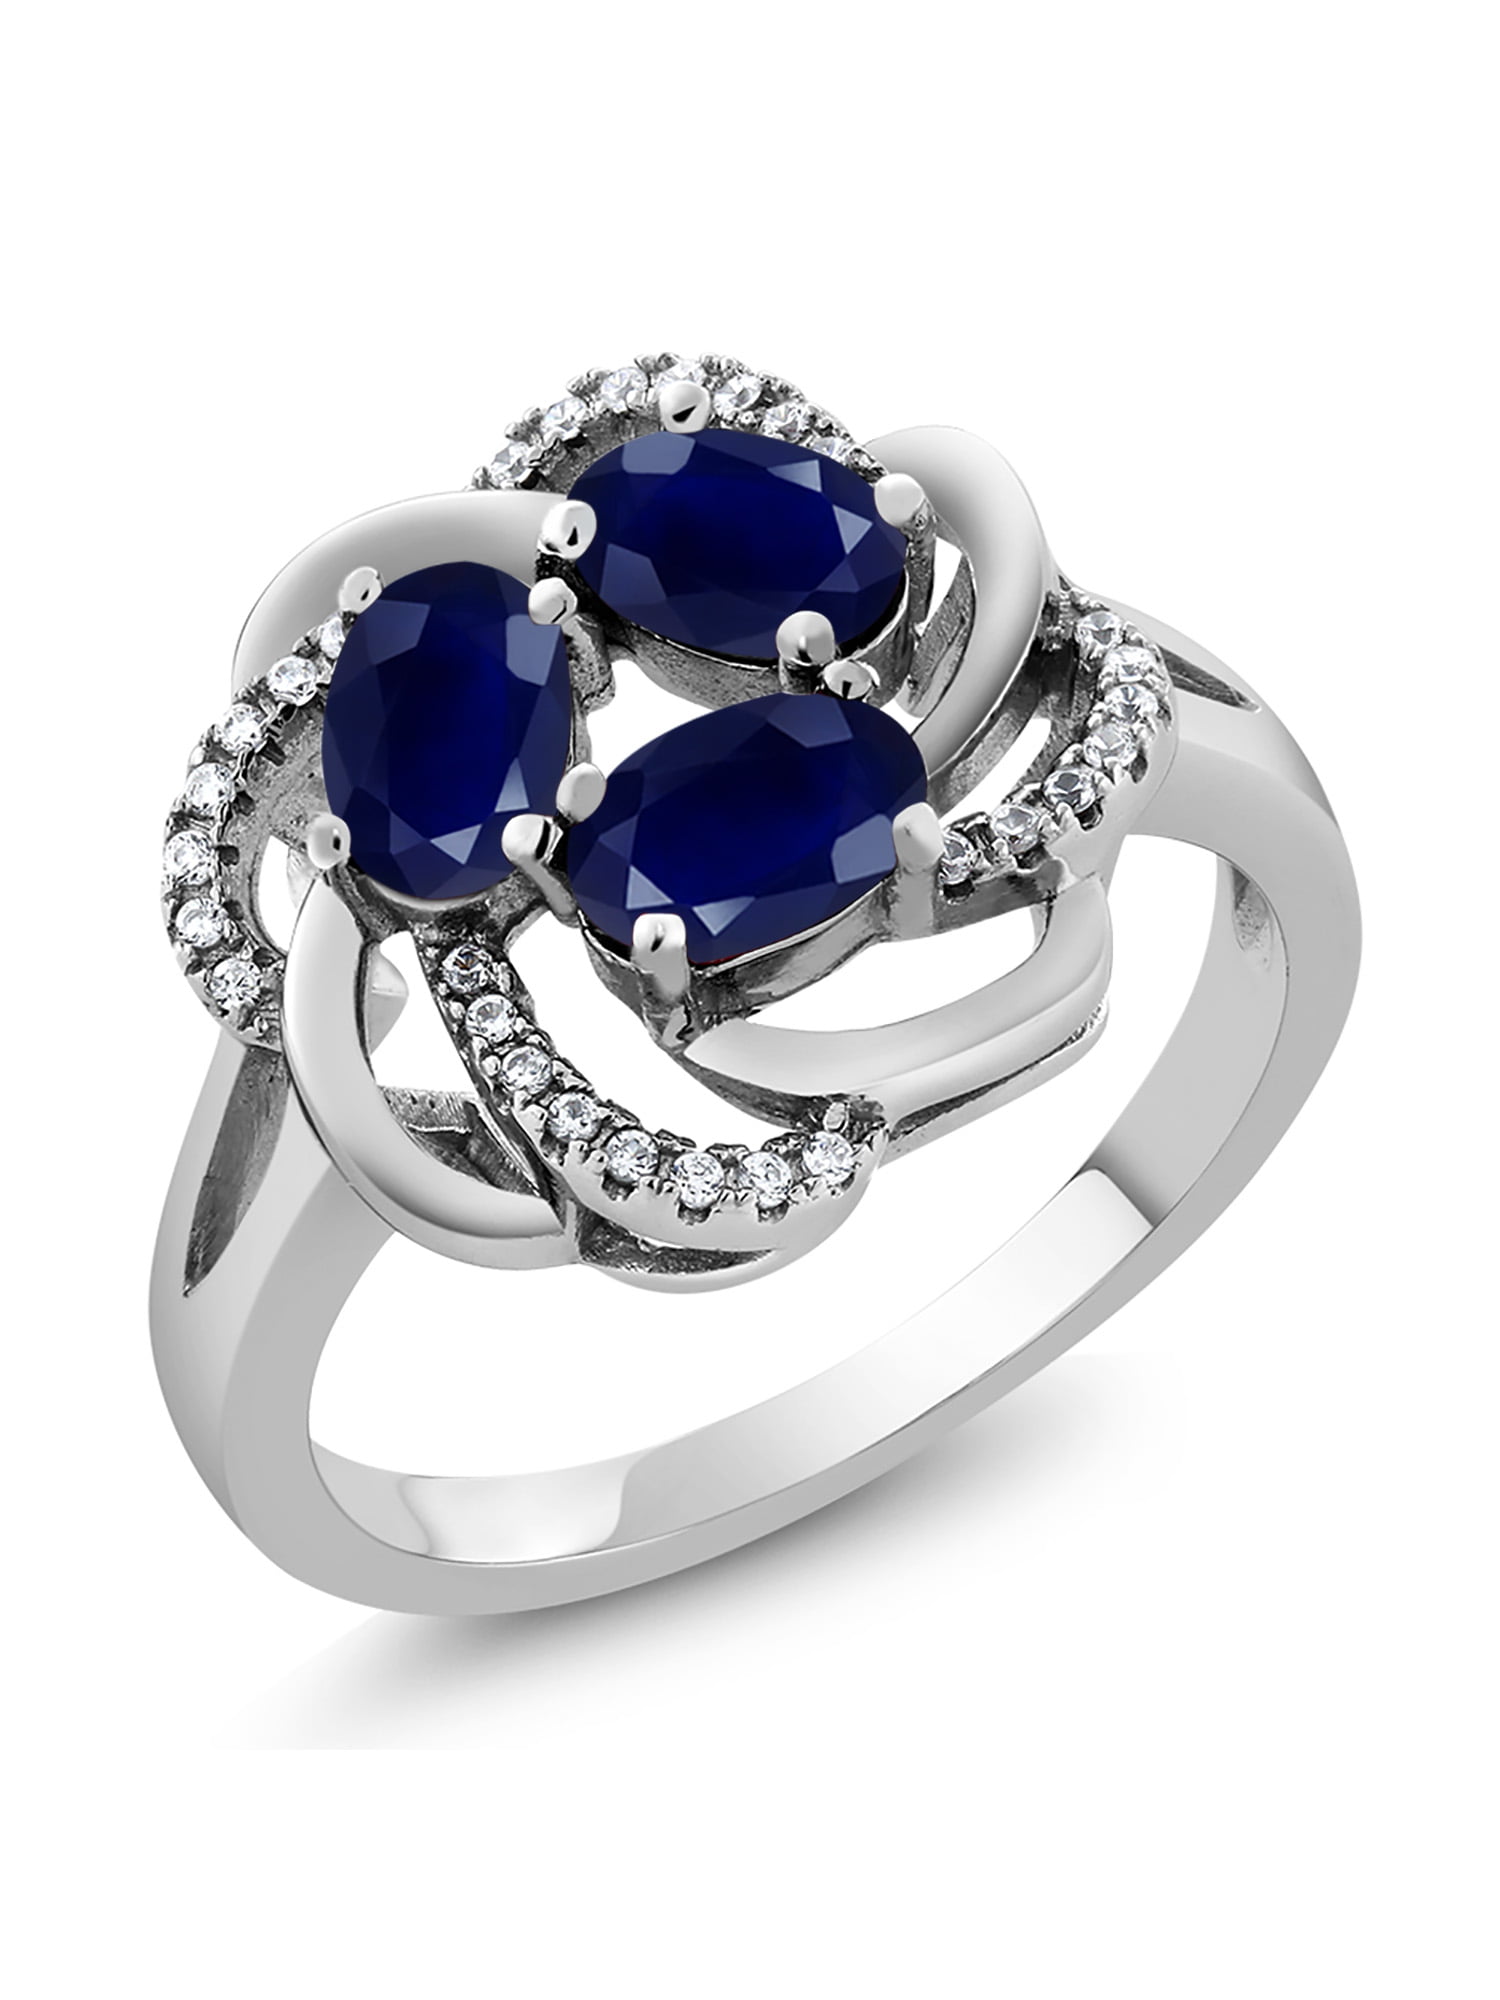 Gem Stone King 925 Sterling Silver Blue Sapphire Women's Ring 2.02 Cttw Gemstone Birthstone Available 5,6,7,8,9 